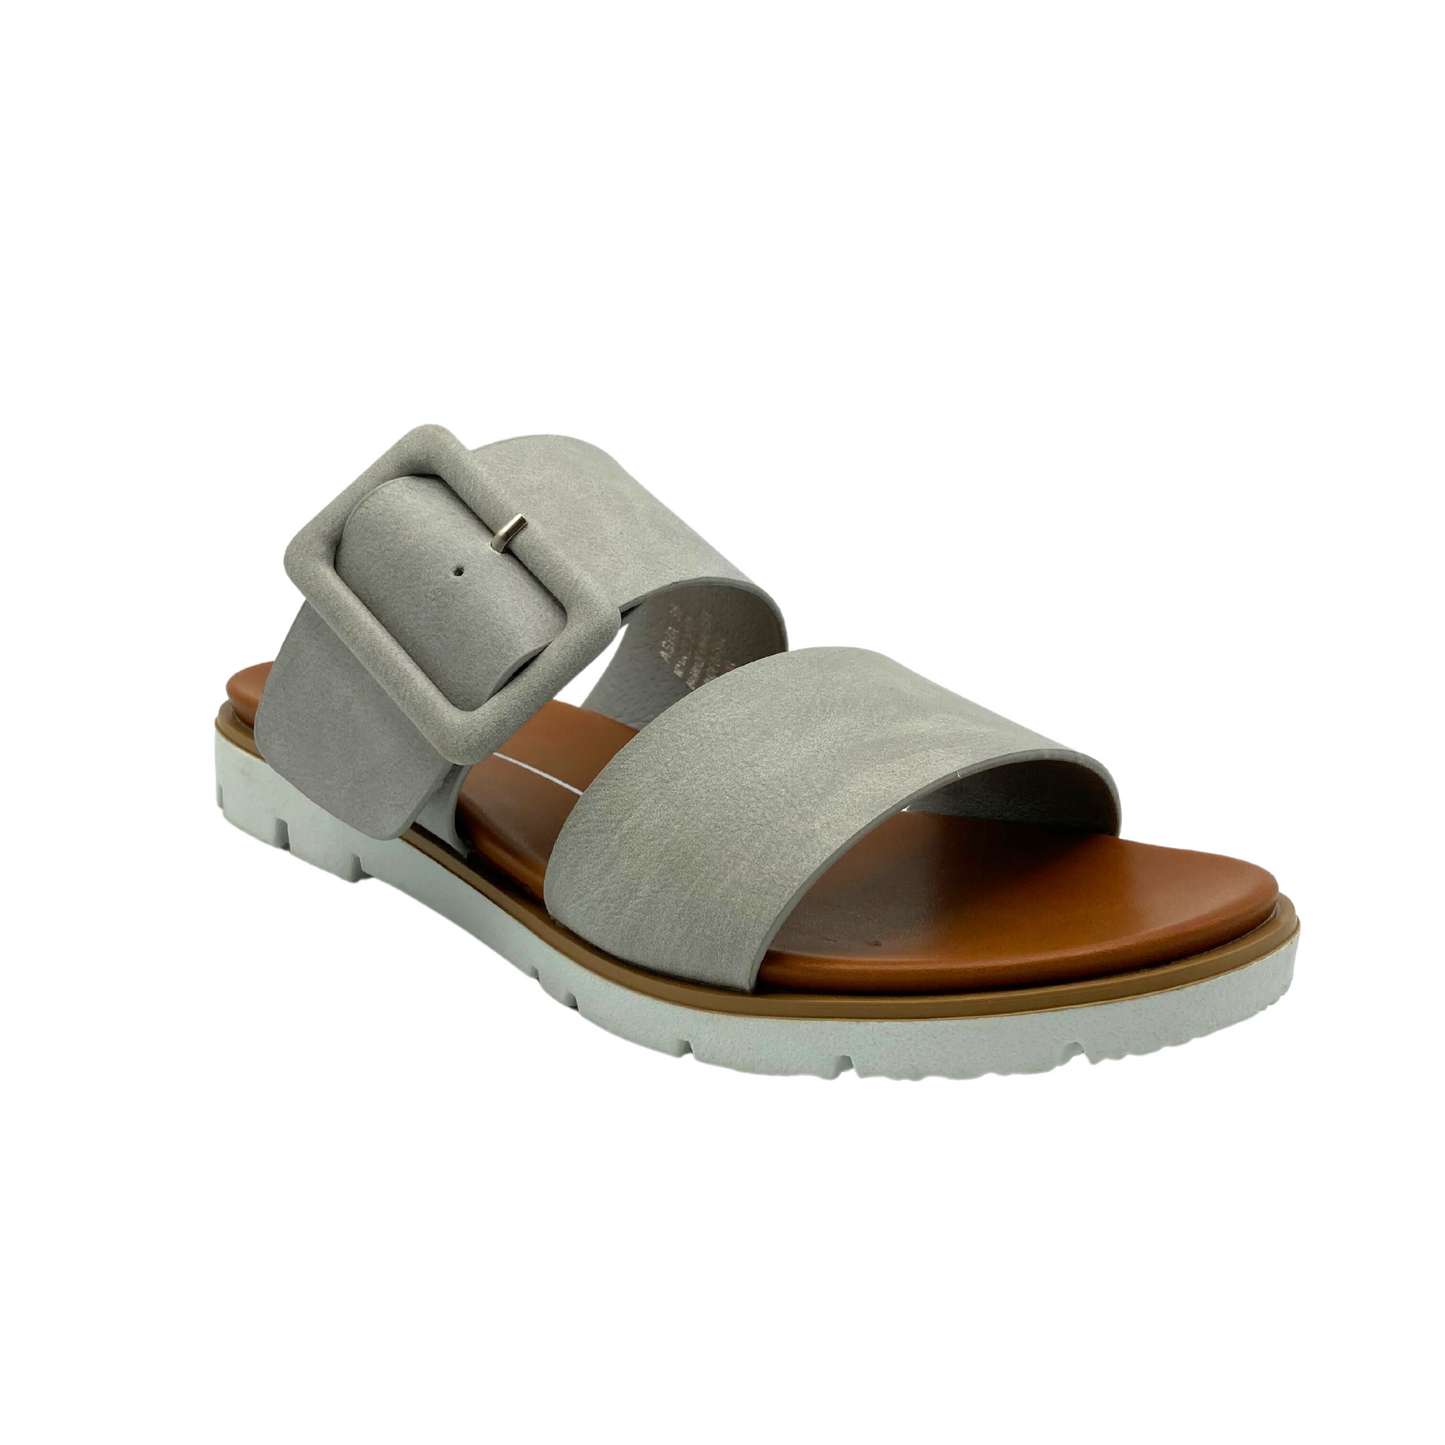 Angled front view of a slip on sandal.  Grey/beige man made upper with a white sole